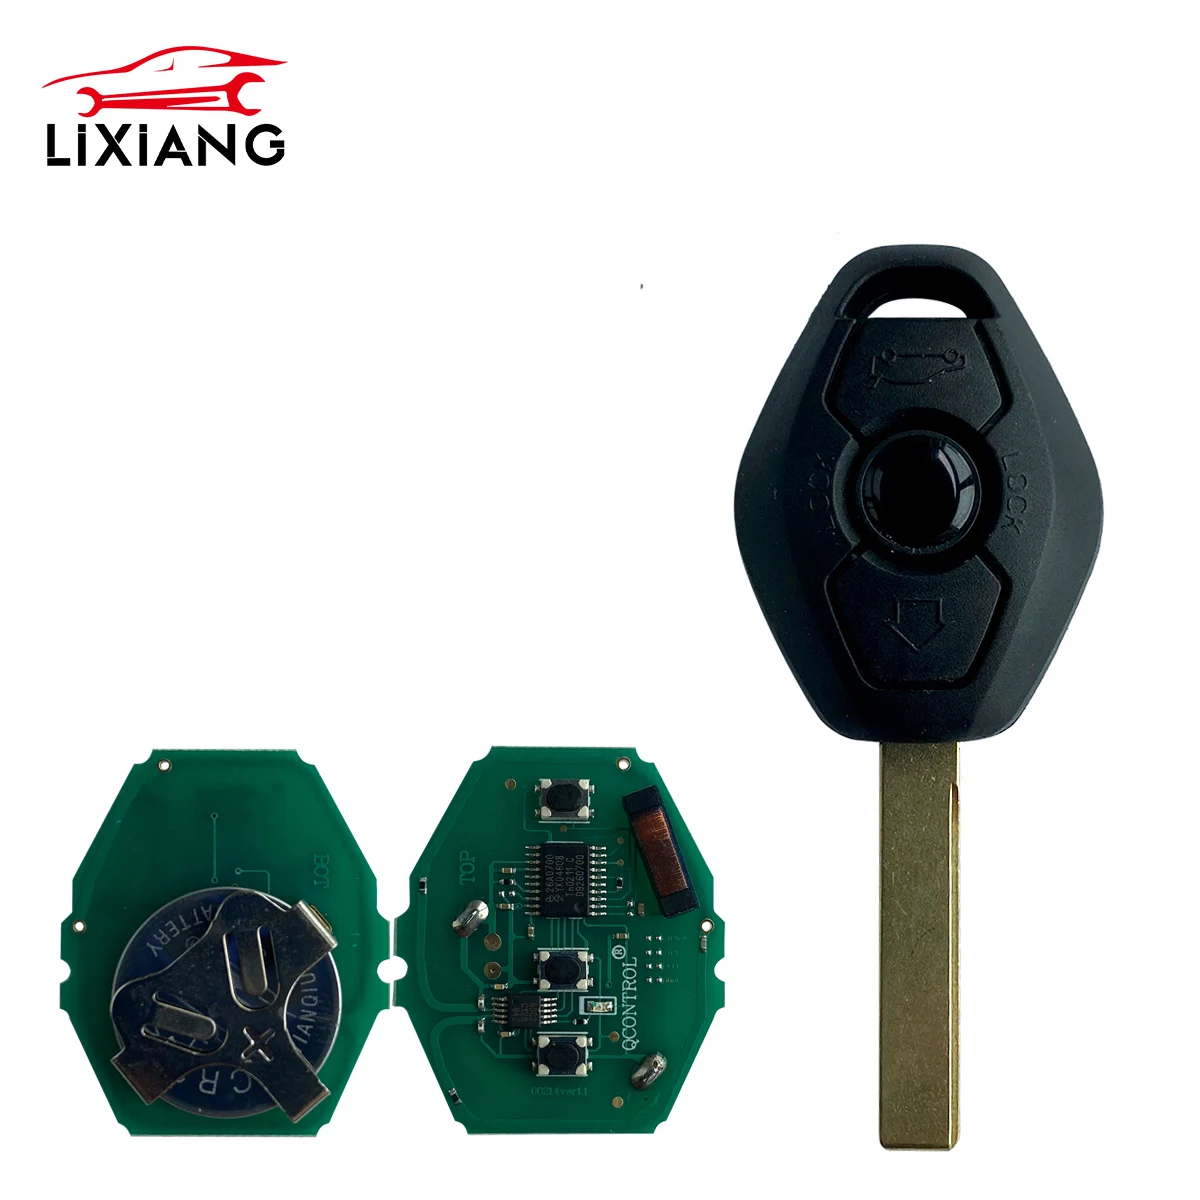 

LIXIANG 3 buttons Remote Key for BMW 3 5 7 series X3 X5 Z3 Z4 Z8 E46 E60 E83 E53 E36 E38 CAS2 315LP MHZ 315MHz 433MHZ 868MHZ